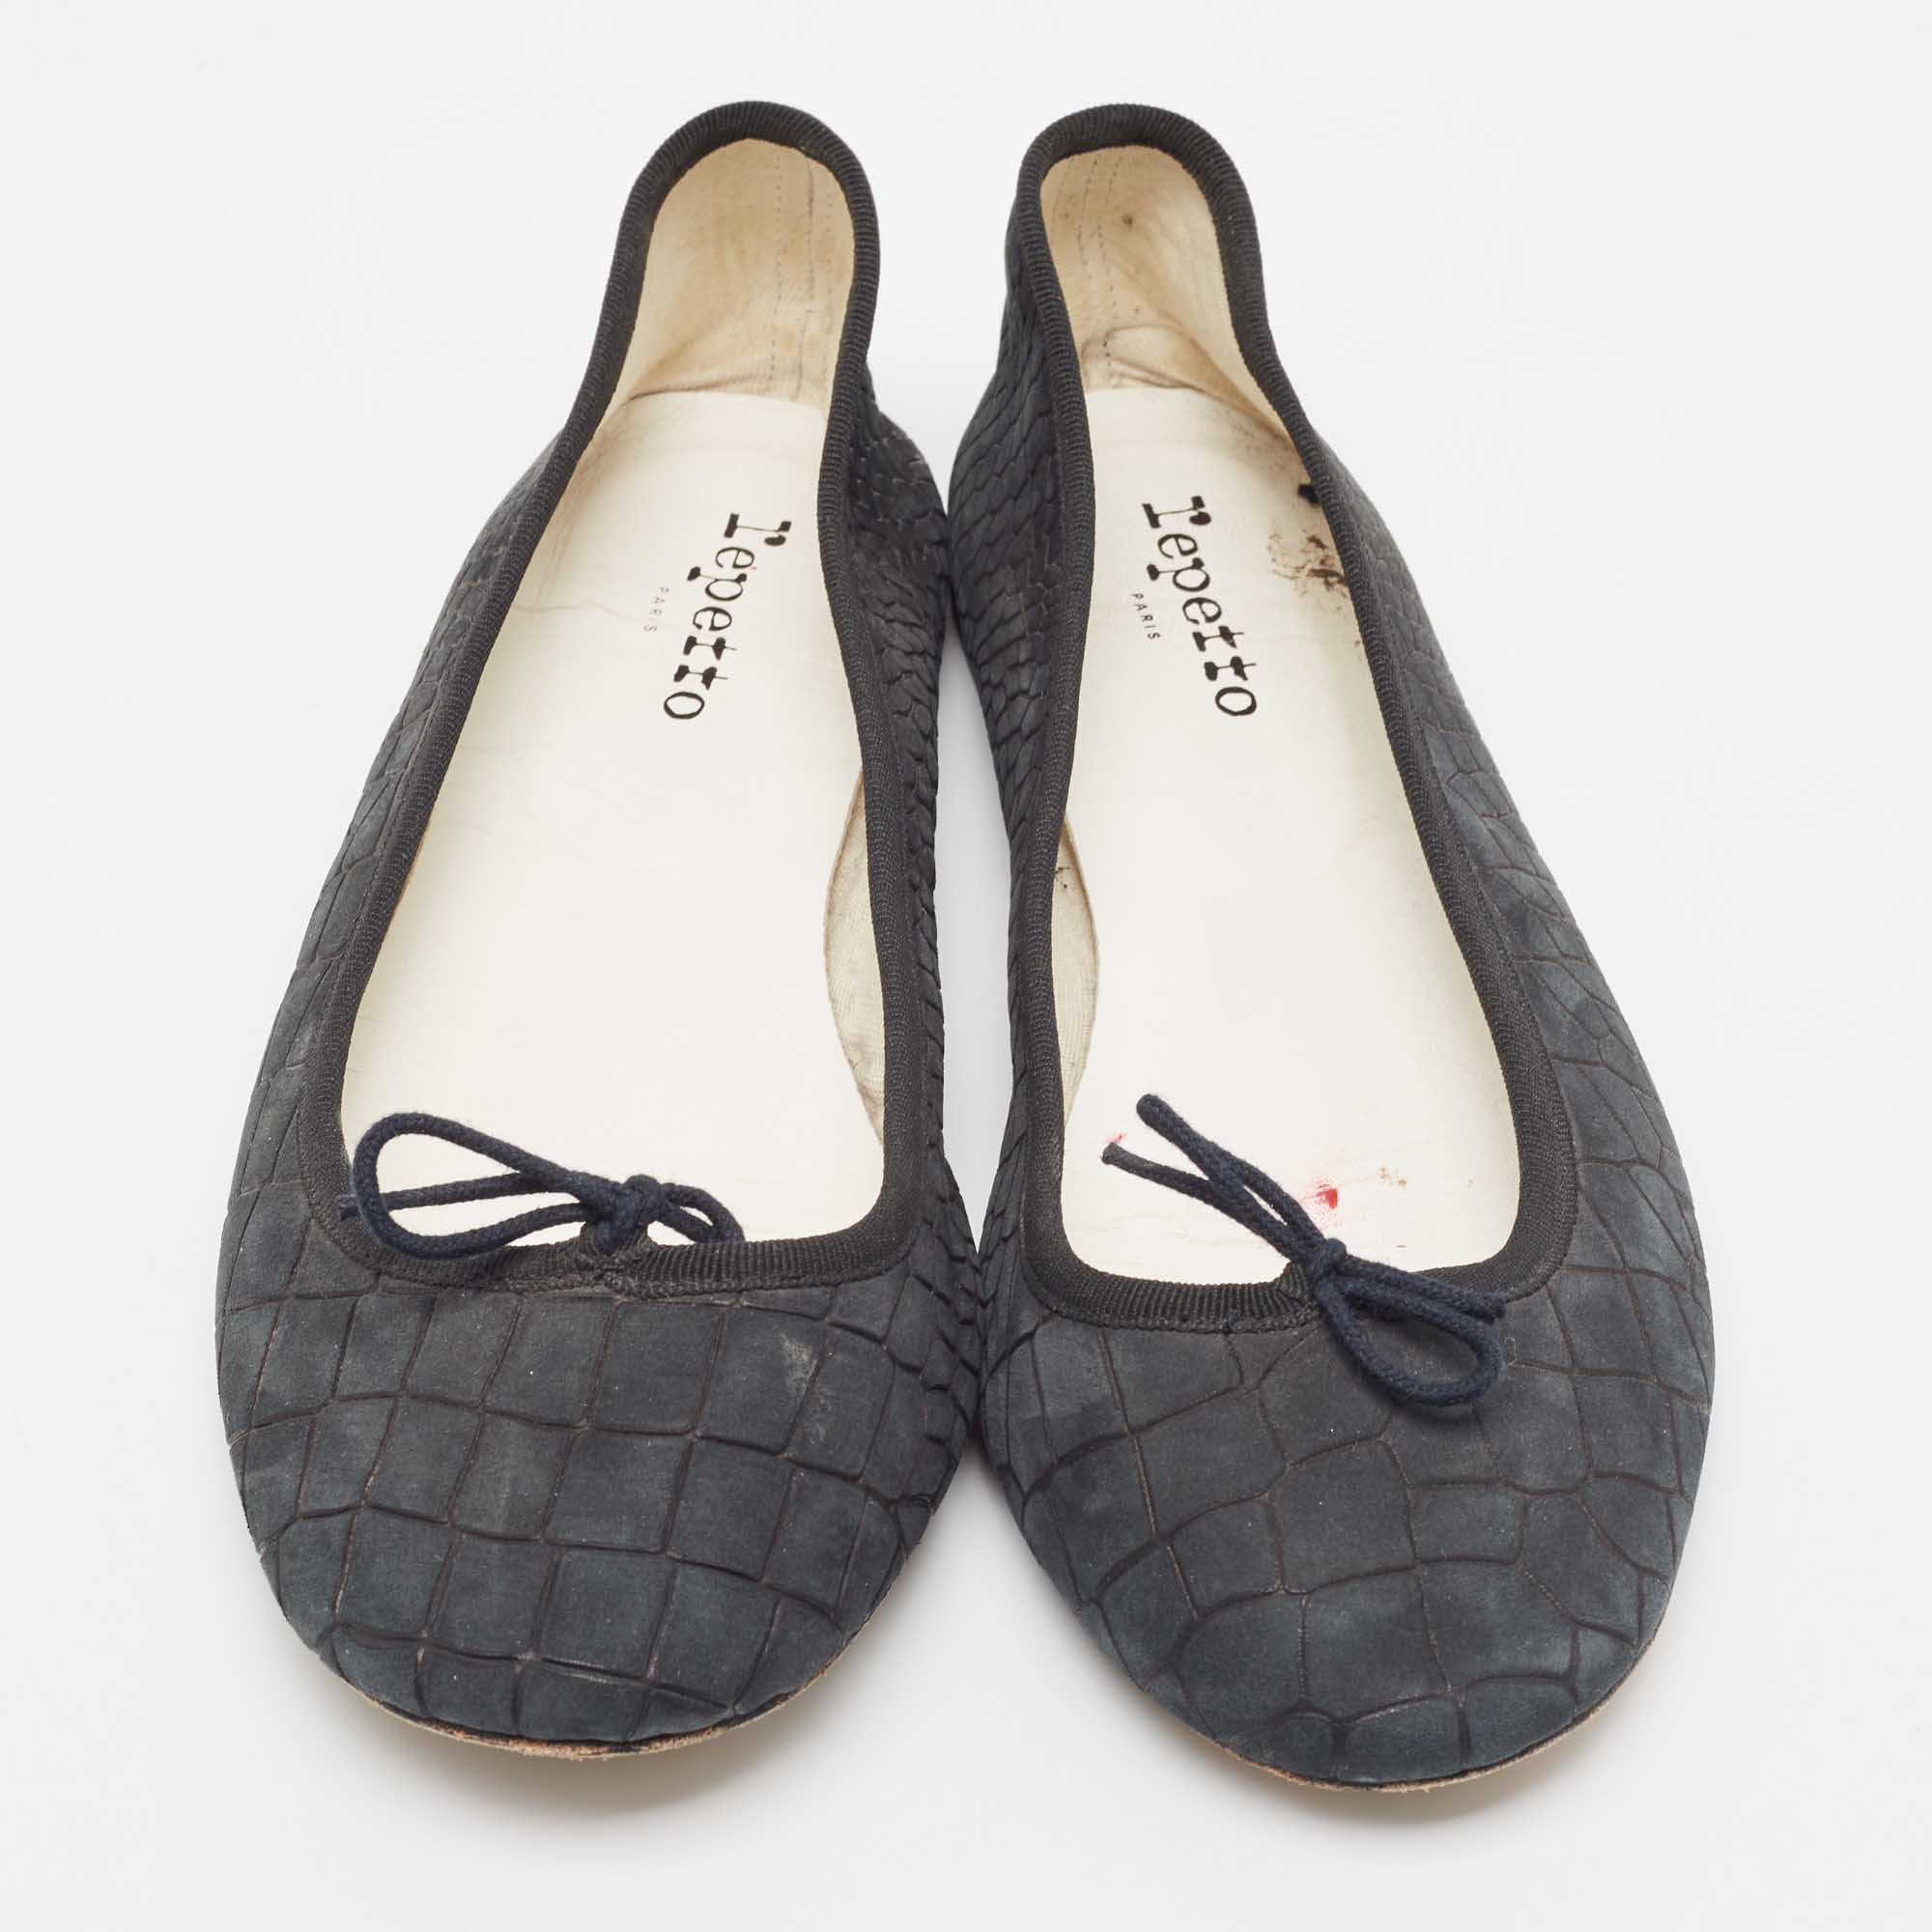 Repetto Black Croc Embossed Leather Bow Ballet Flats Size 42